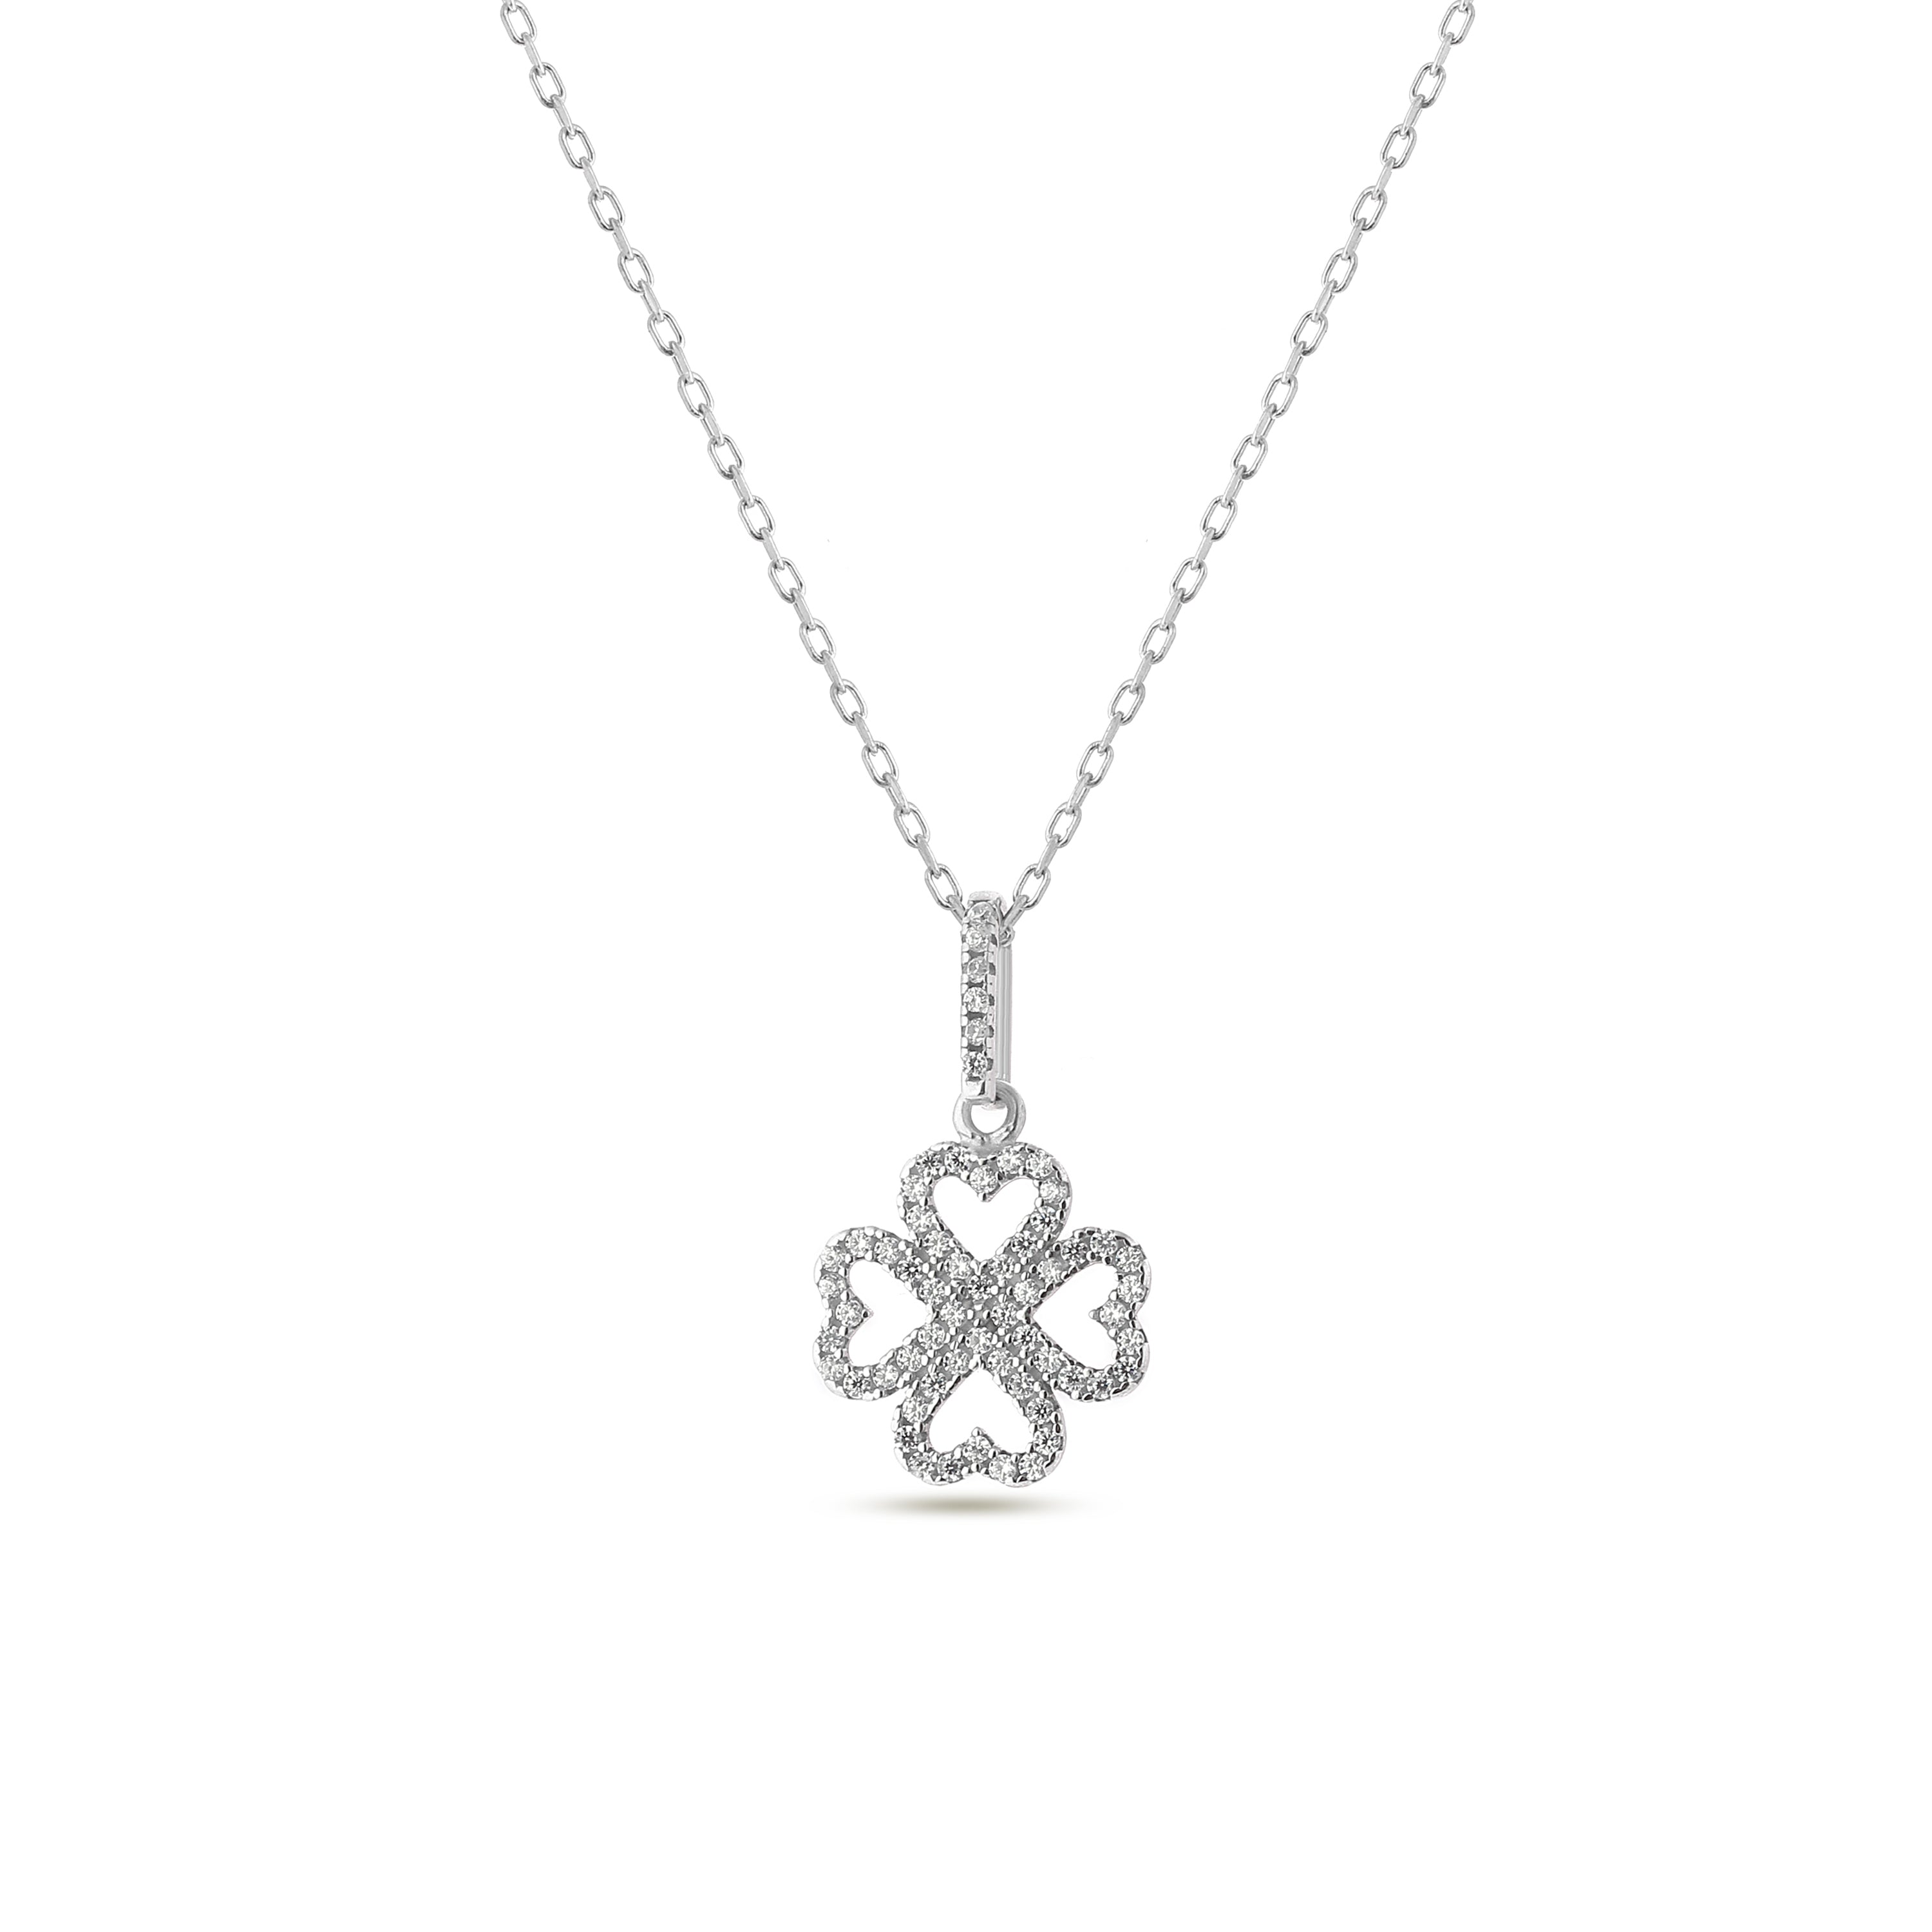 Sterling Silver Four Leaf Clover Infinity Lariat Necklace